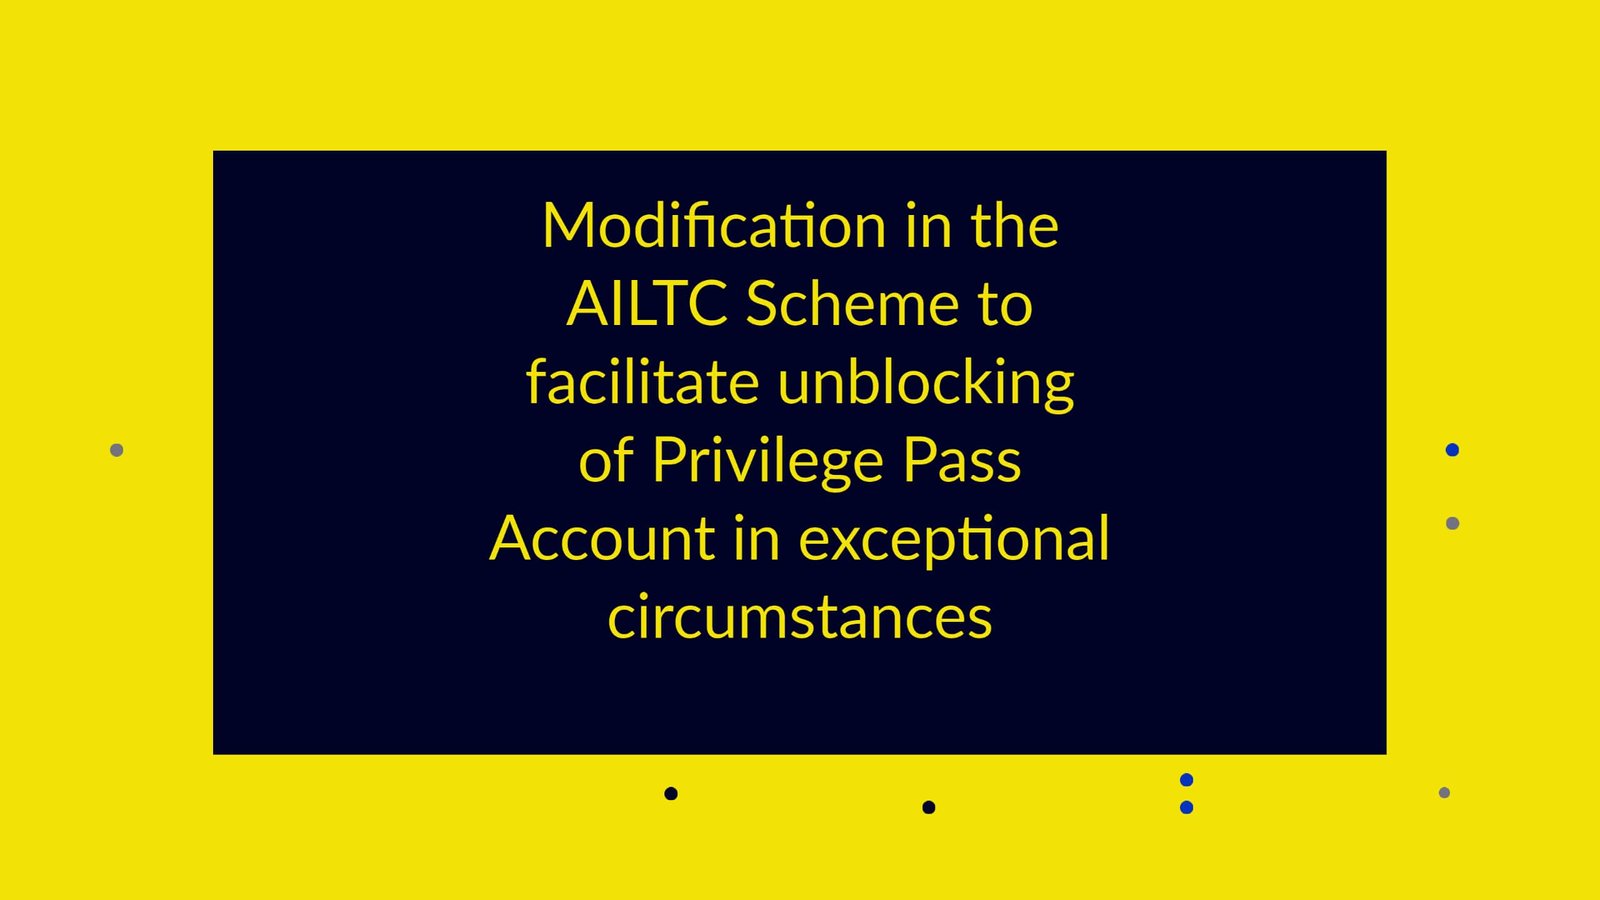 Modification in the AILTC Scheme to facilitate unblocking of Privilege Pass Account in exceptional circumstances